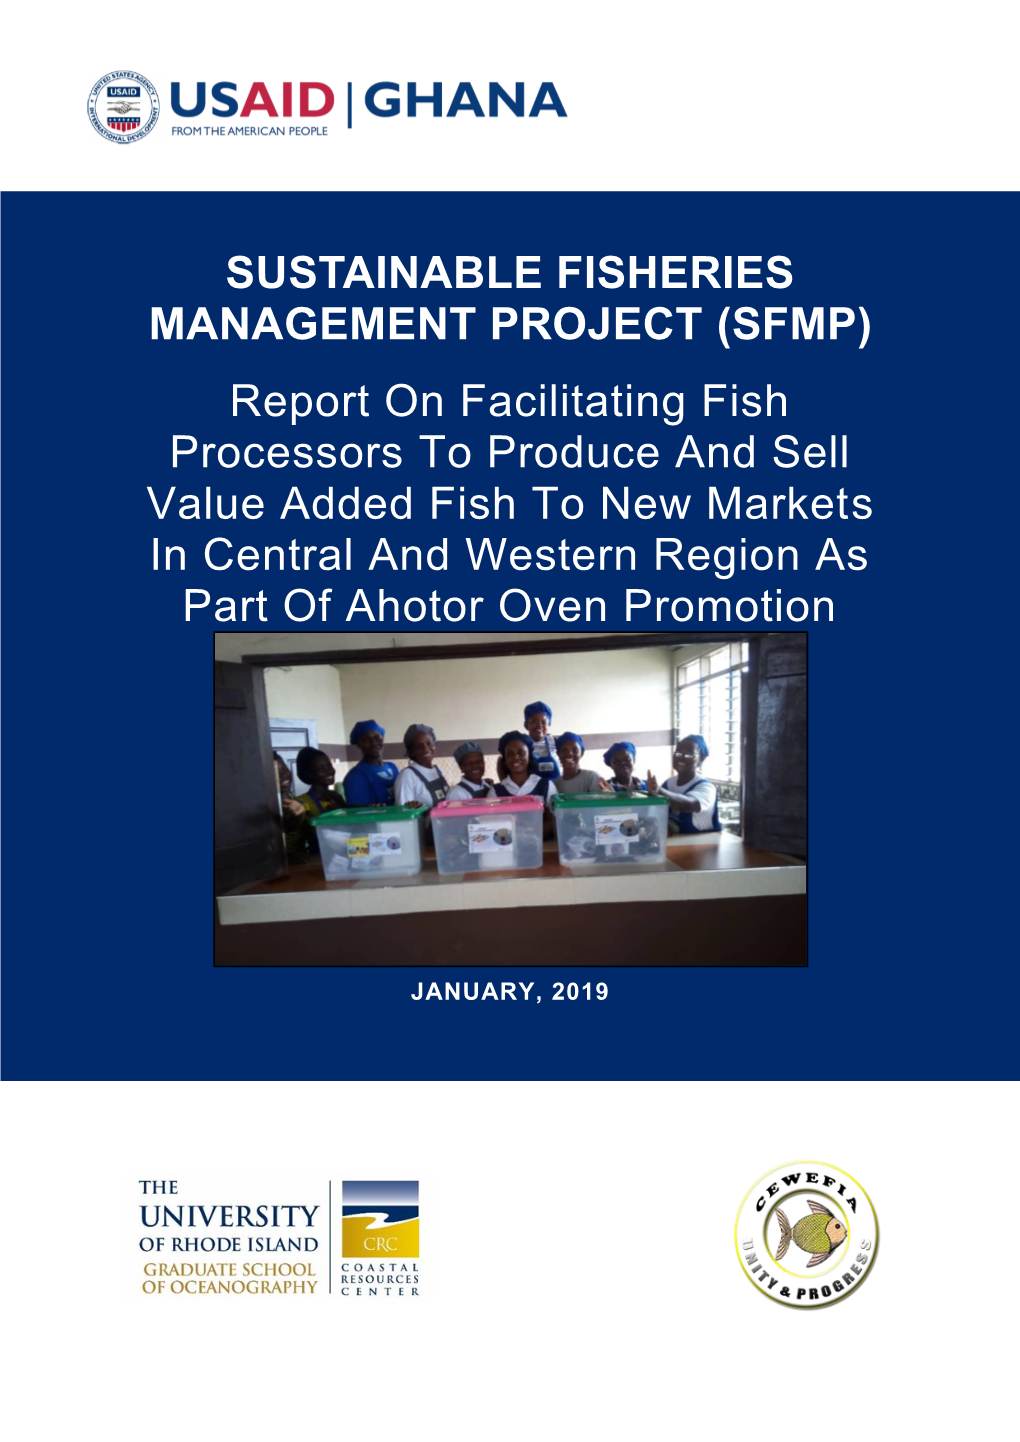 Report on Facilitating Fish Processors to Produce and Sell Value Added Fish to New Markets in Central and Western Region As Part of Ahotor Oven Promotion